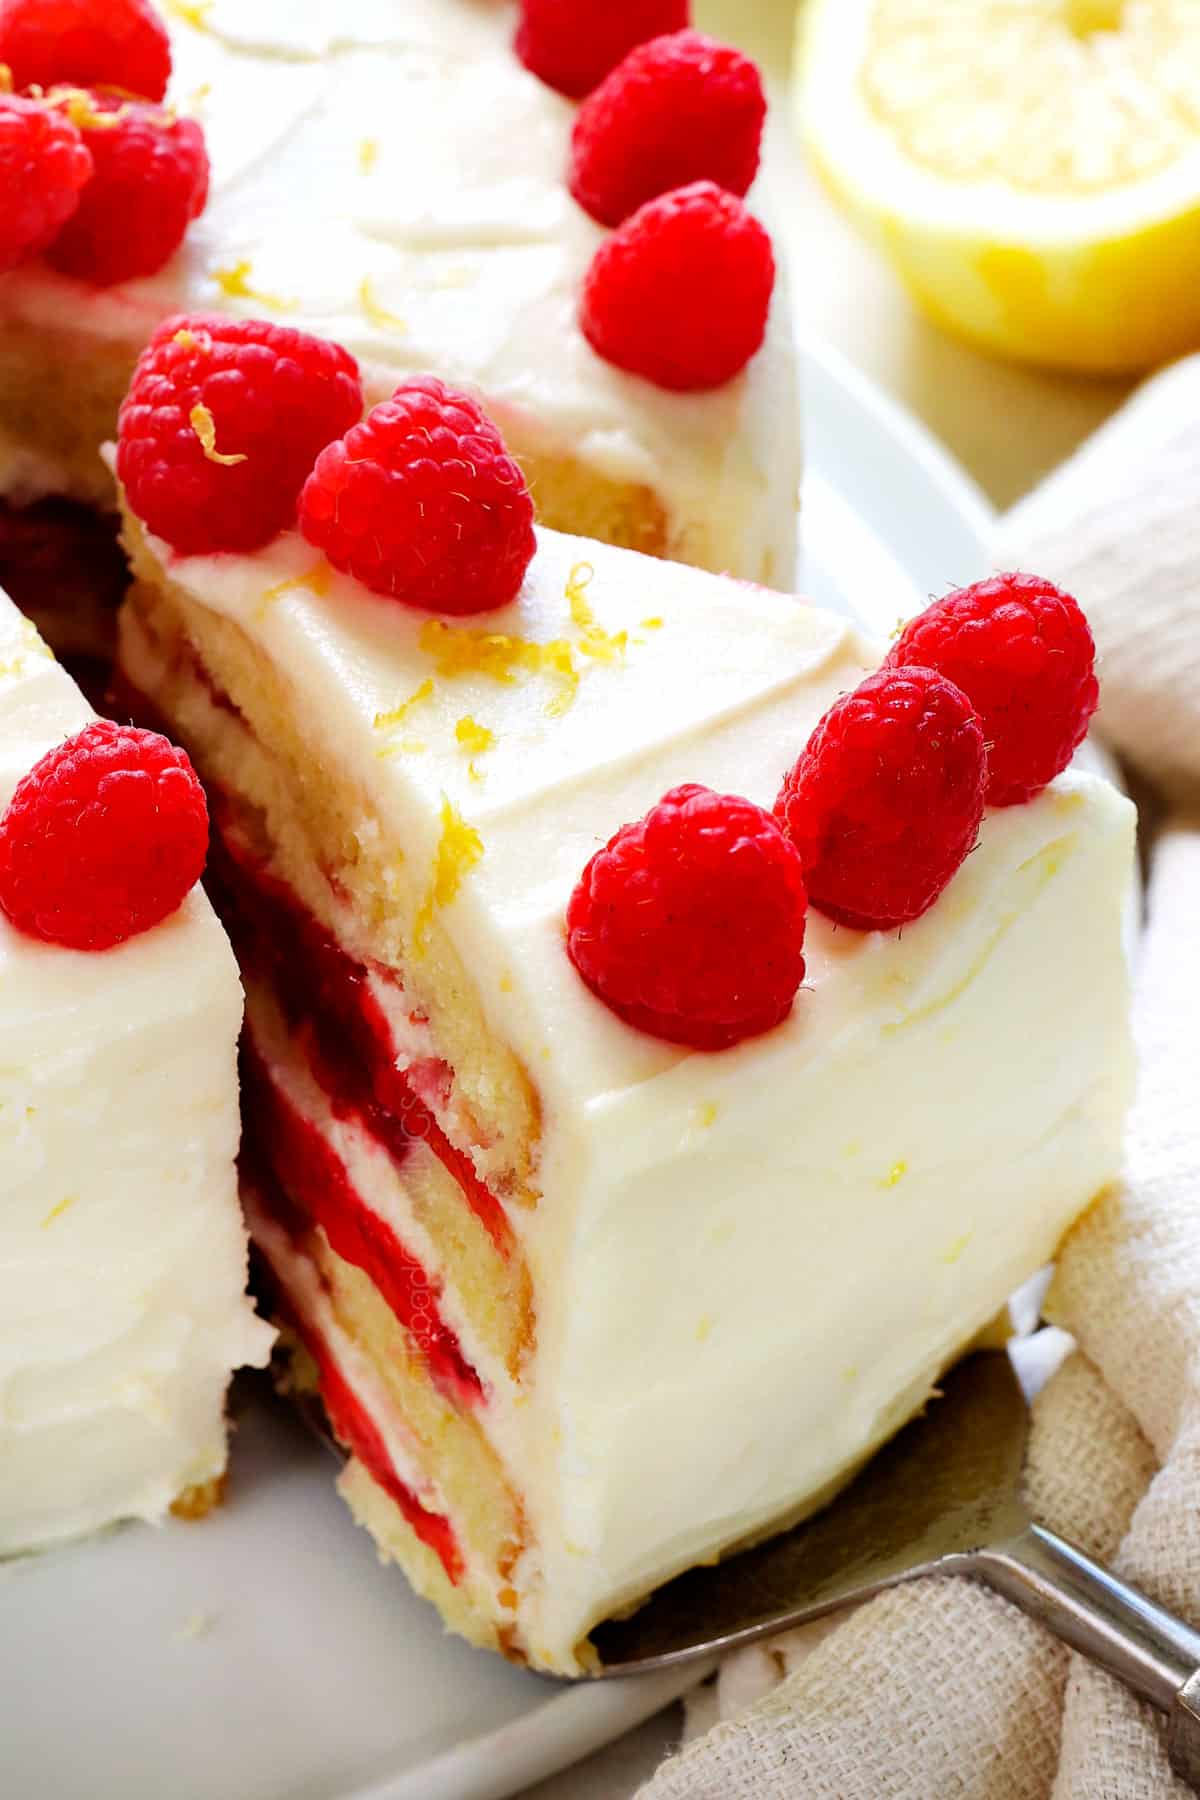 serving Lemon Raspberry Cake by slicing while it's chilled